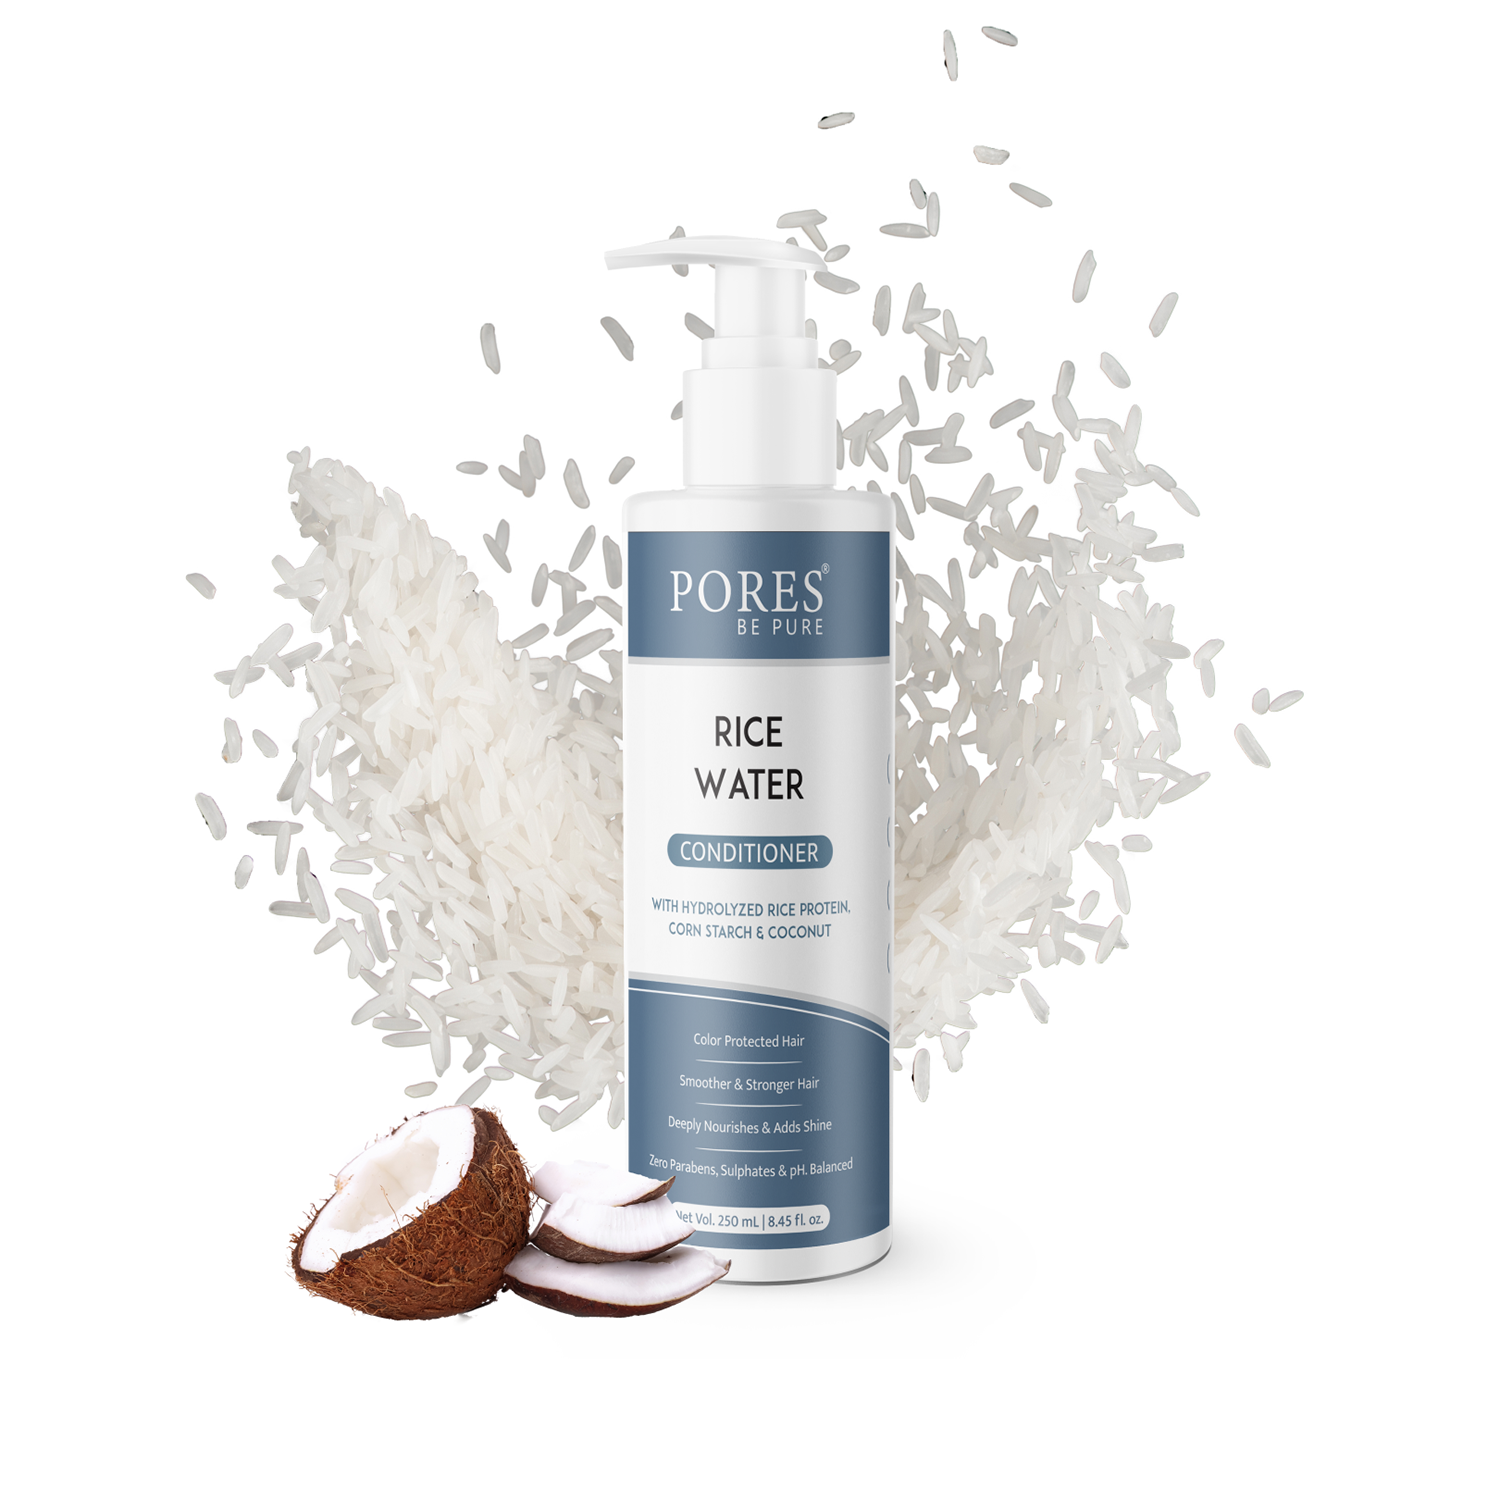 Rice Water Conditioner for Smoother and Stronger hair by PORES BE PURE